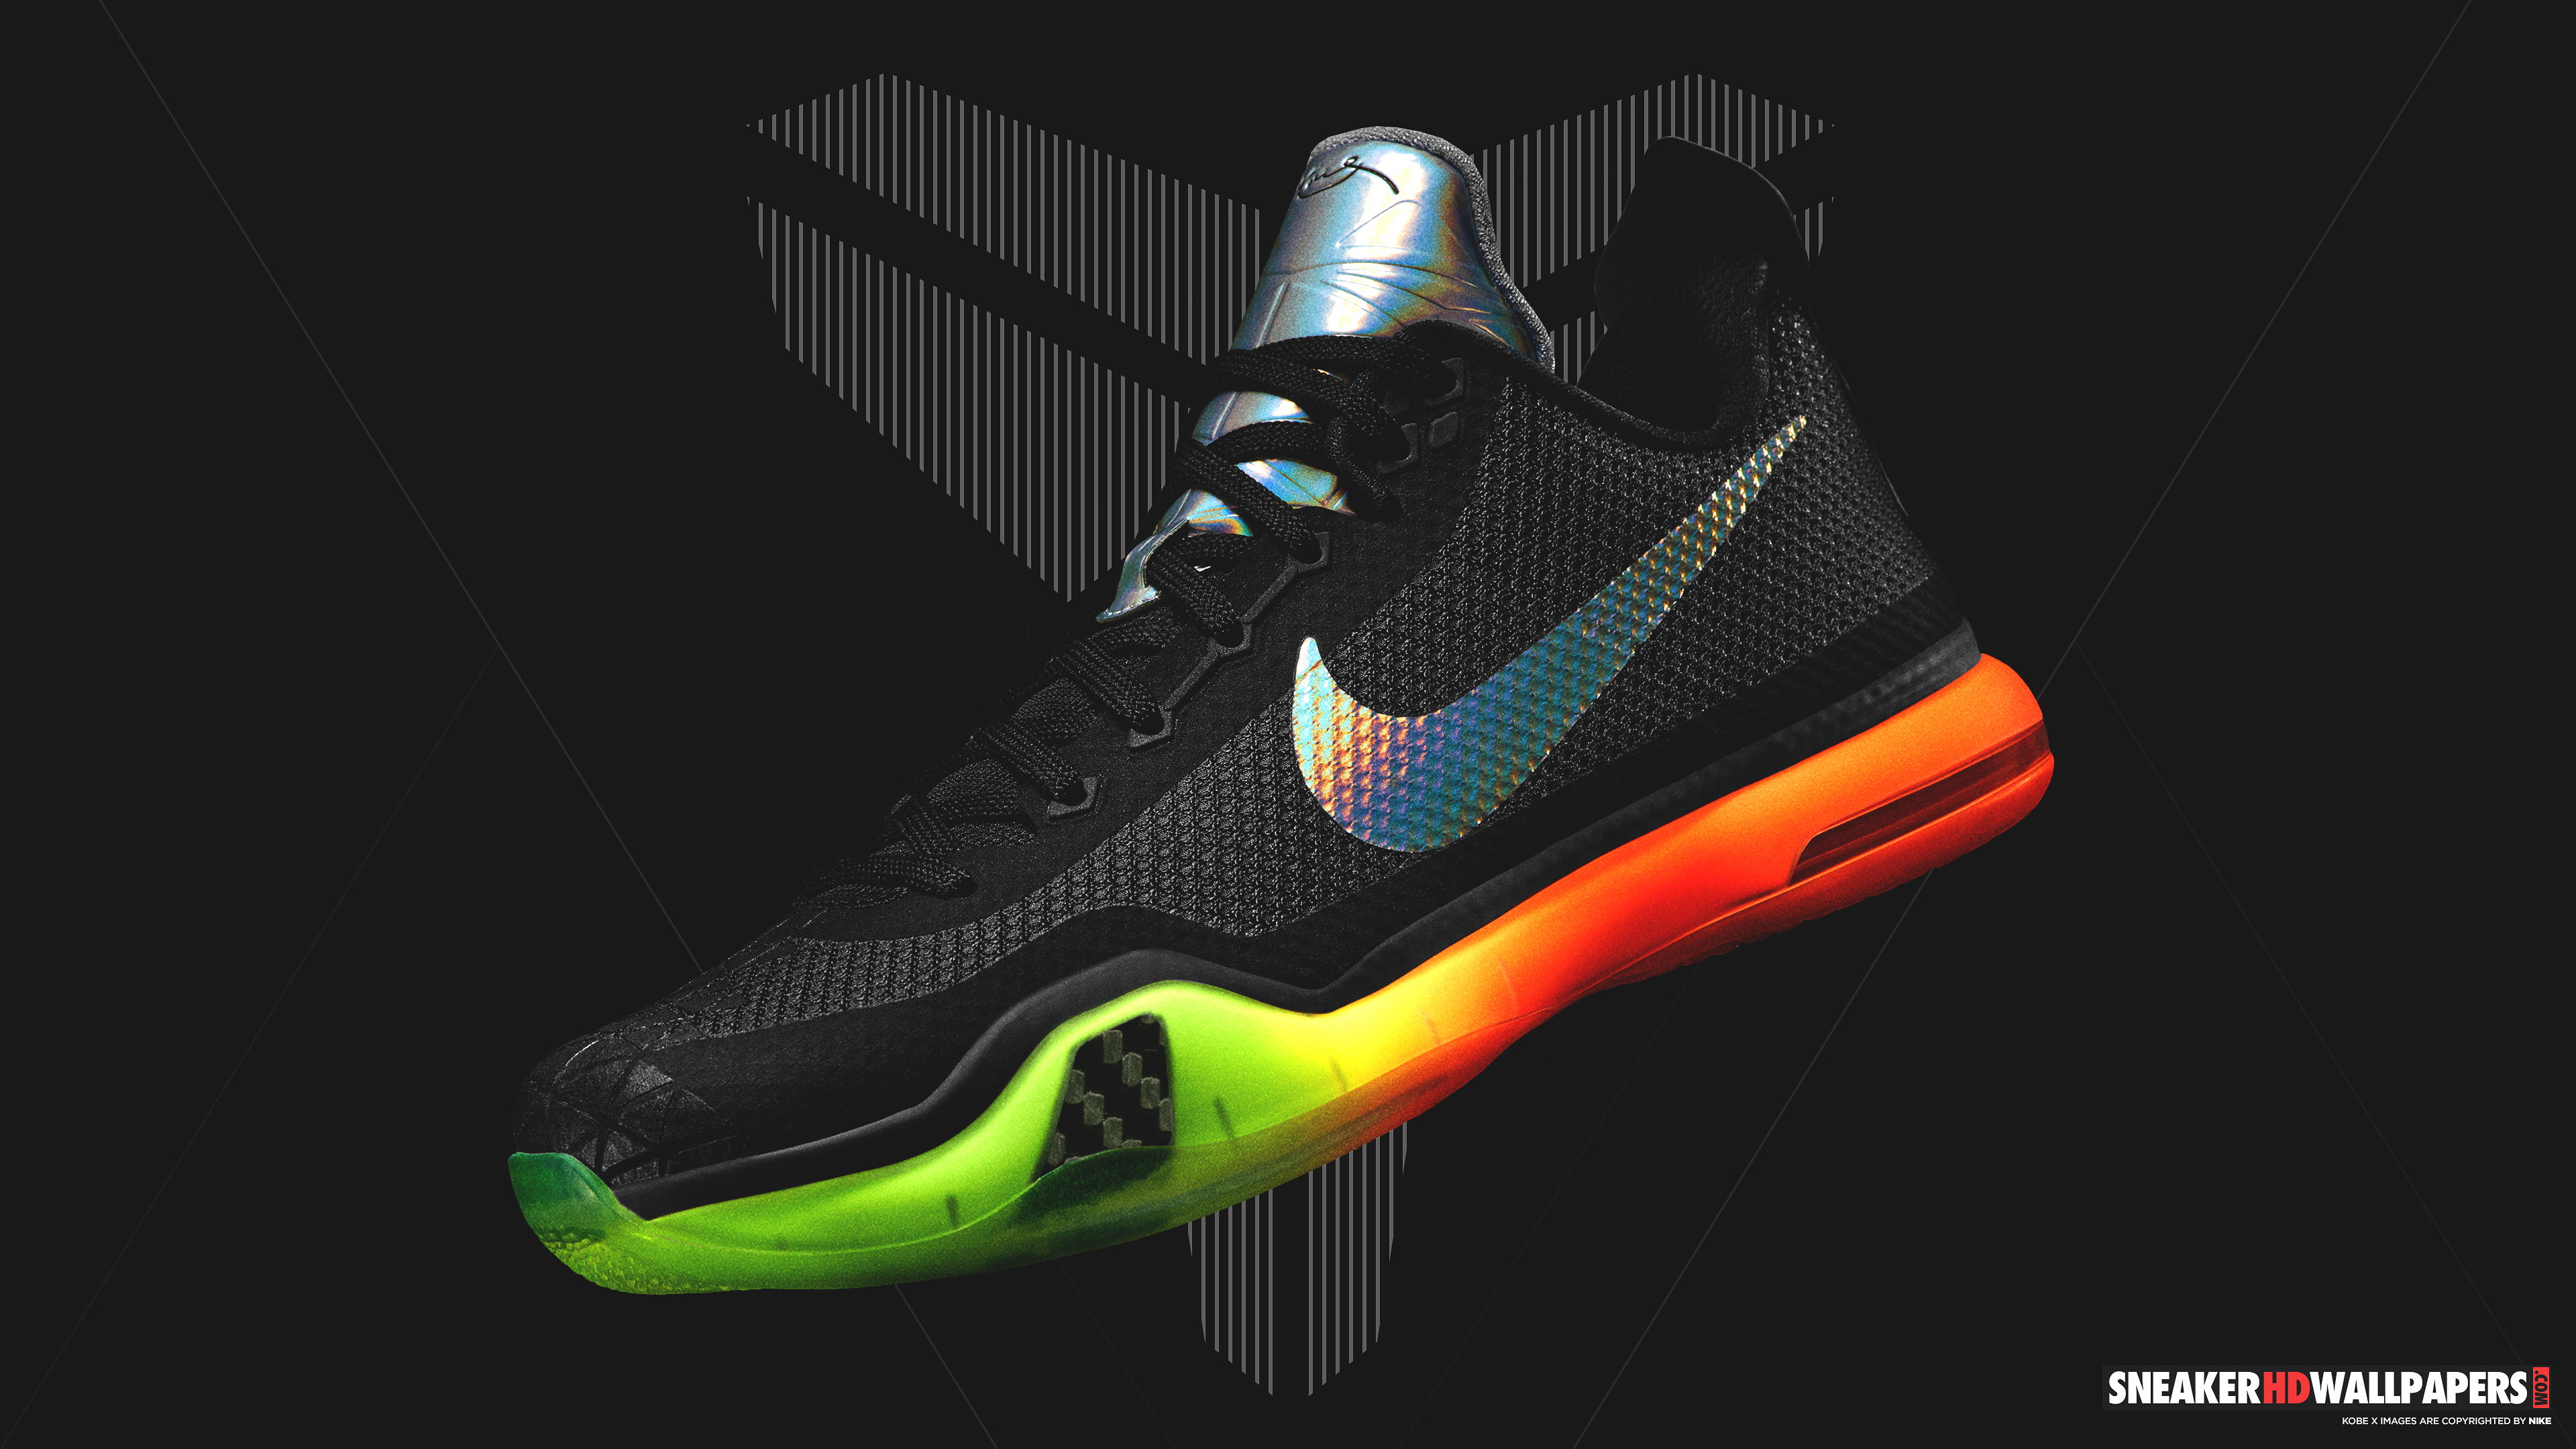 Nike Wallpapers HD 2015 Top Collections of Pictures Images